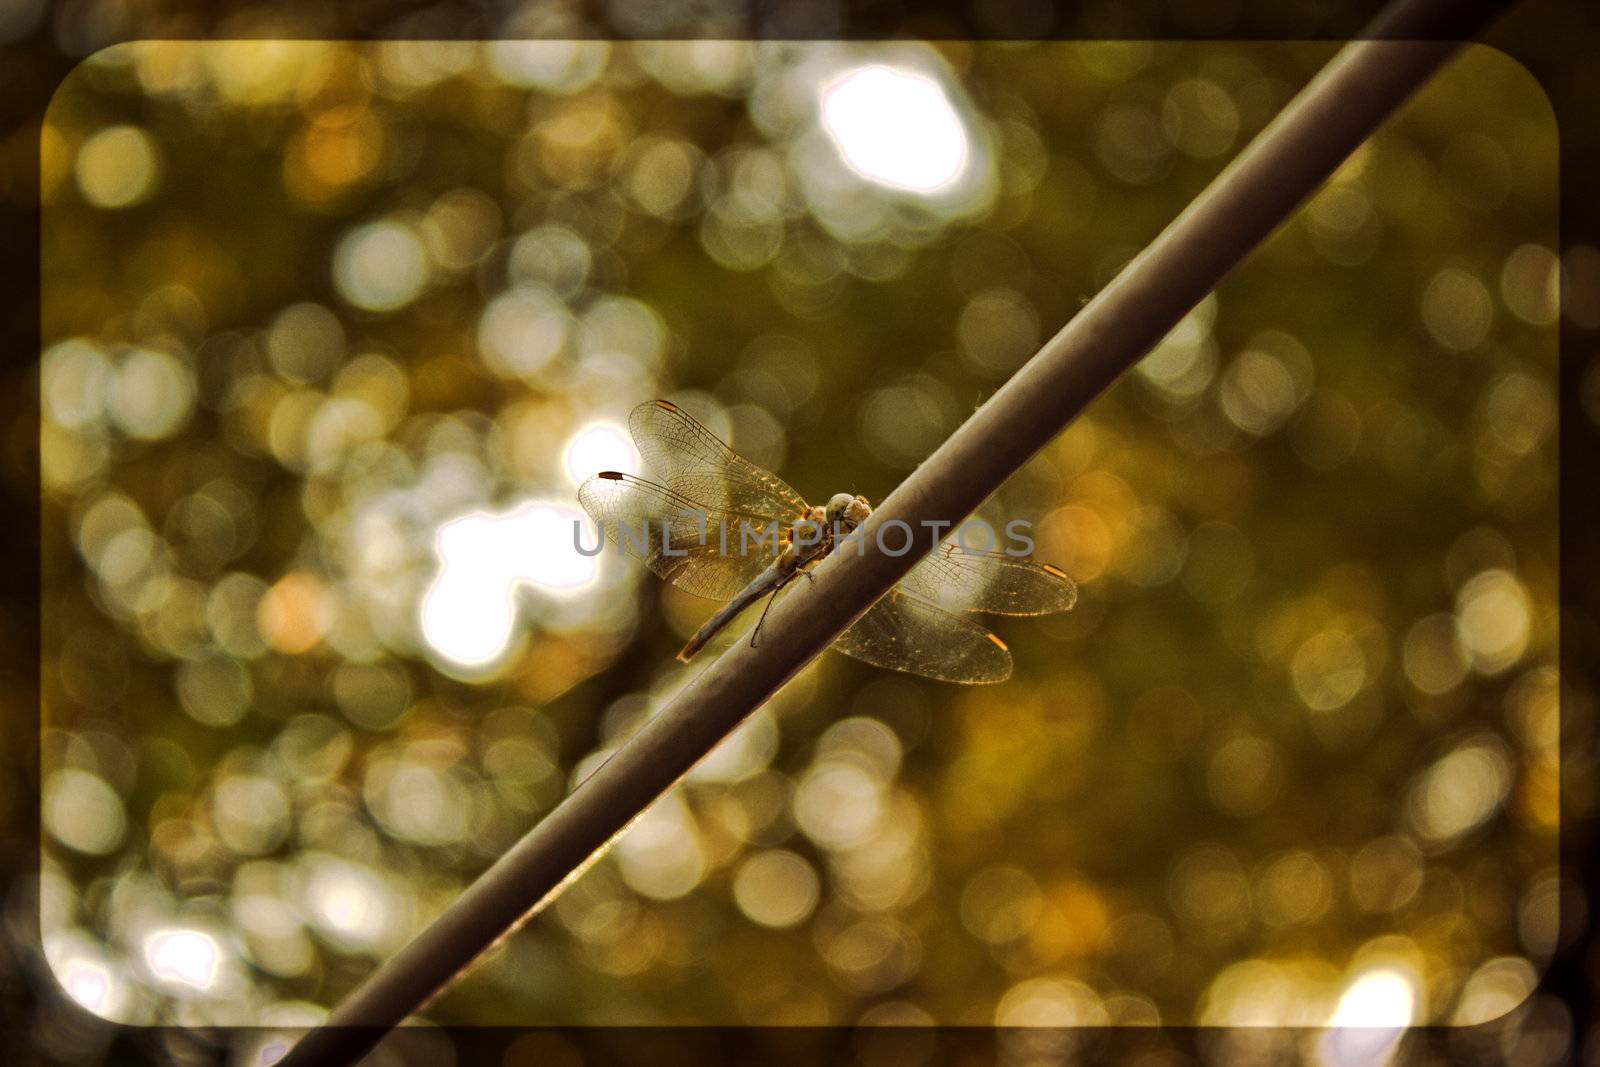 old style image with dragonfly and trees on background